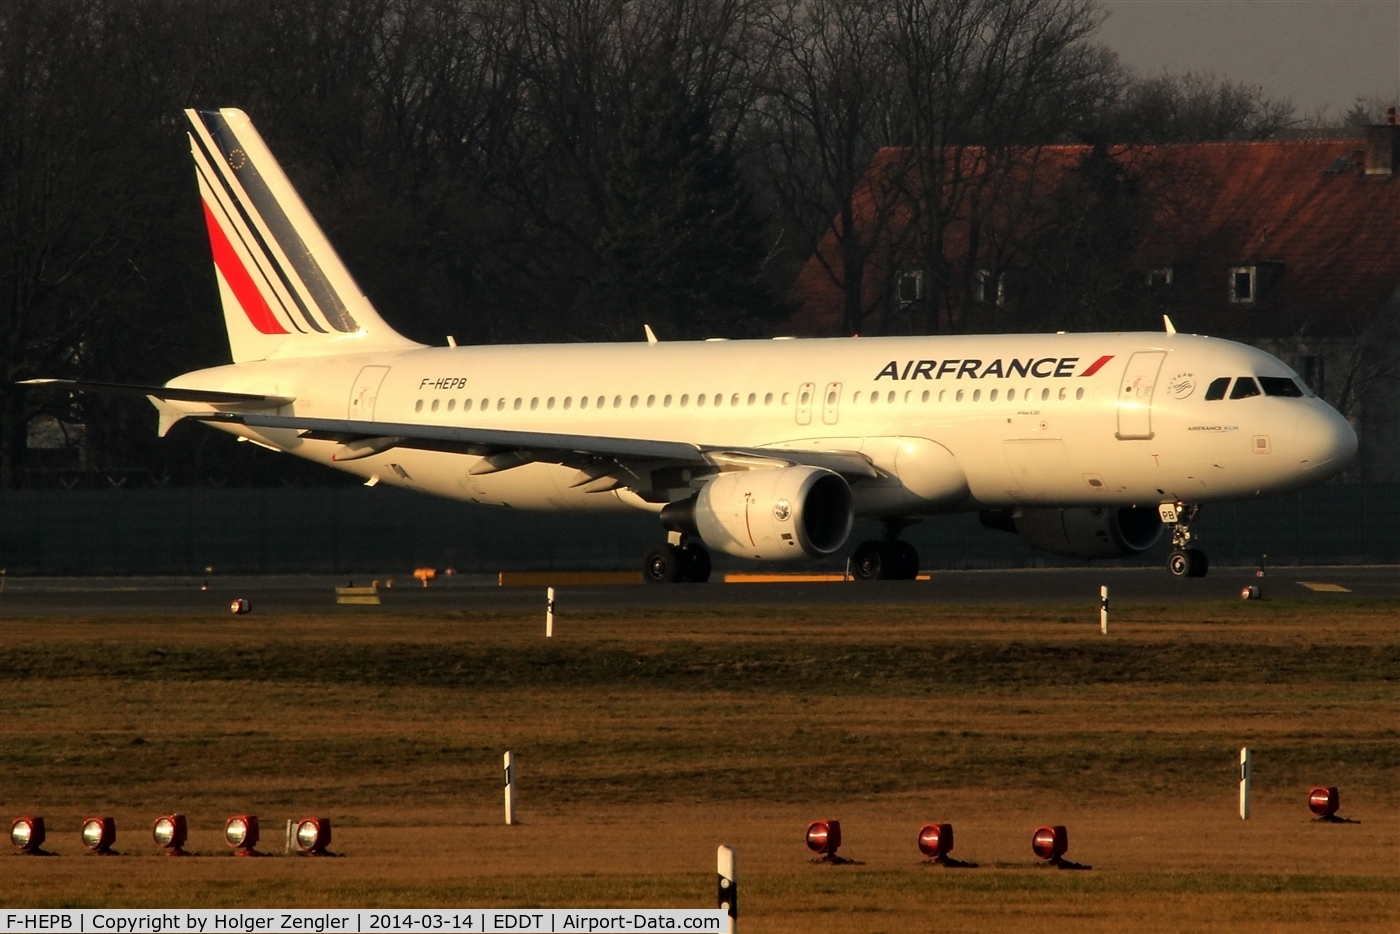 F-HEPB, 2010 Airbus A320-214 C/N 4241, Direction CDG: Todays first link between capitals...